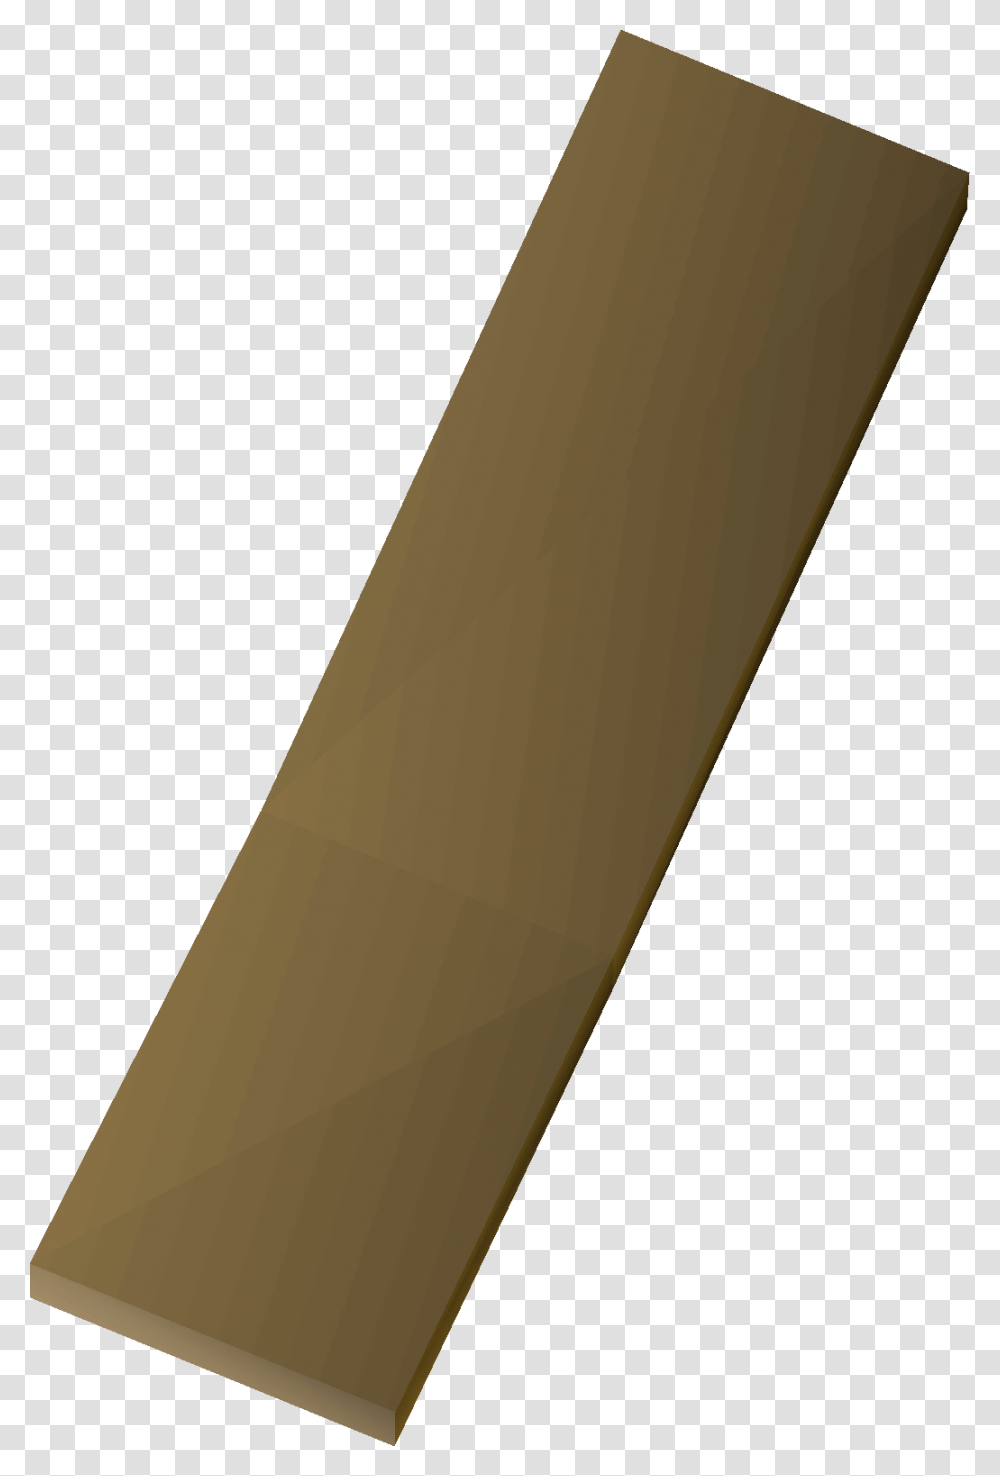 Runescape Plank, Weapon, Weaponry, Scroll, Pencil Transparent Png